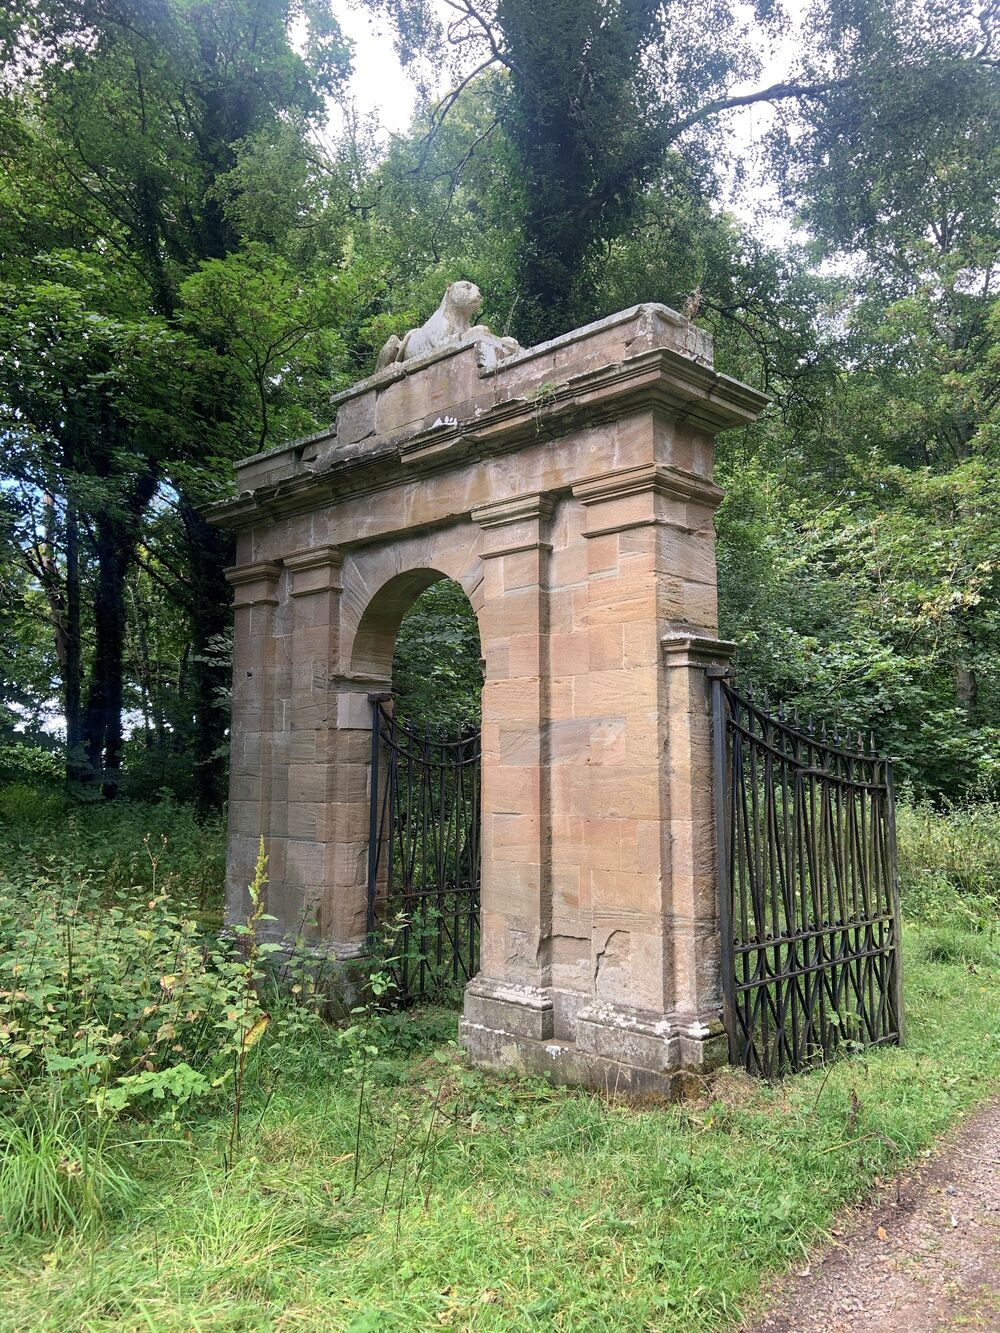 An old stone gateway stands next to a track, with black wrought iron gates standing open. On top of the stone arch lies a stone statue of a large cat. Woodland is behind the track.